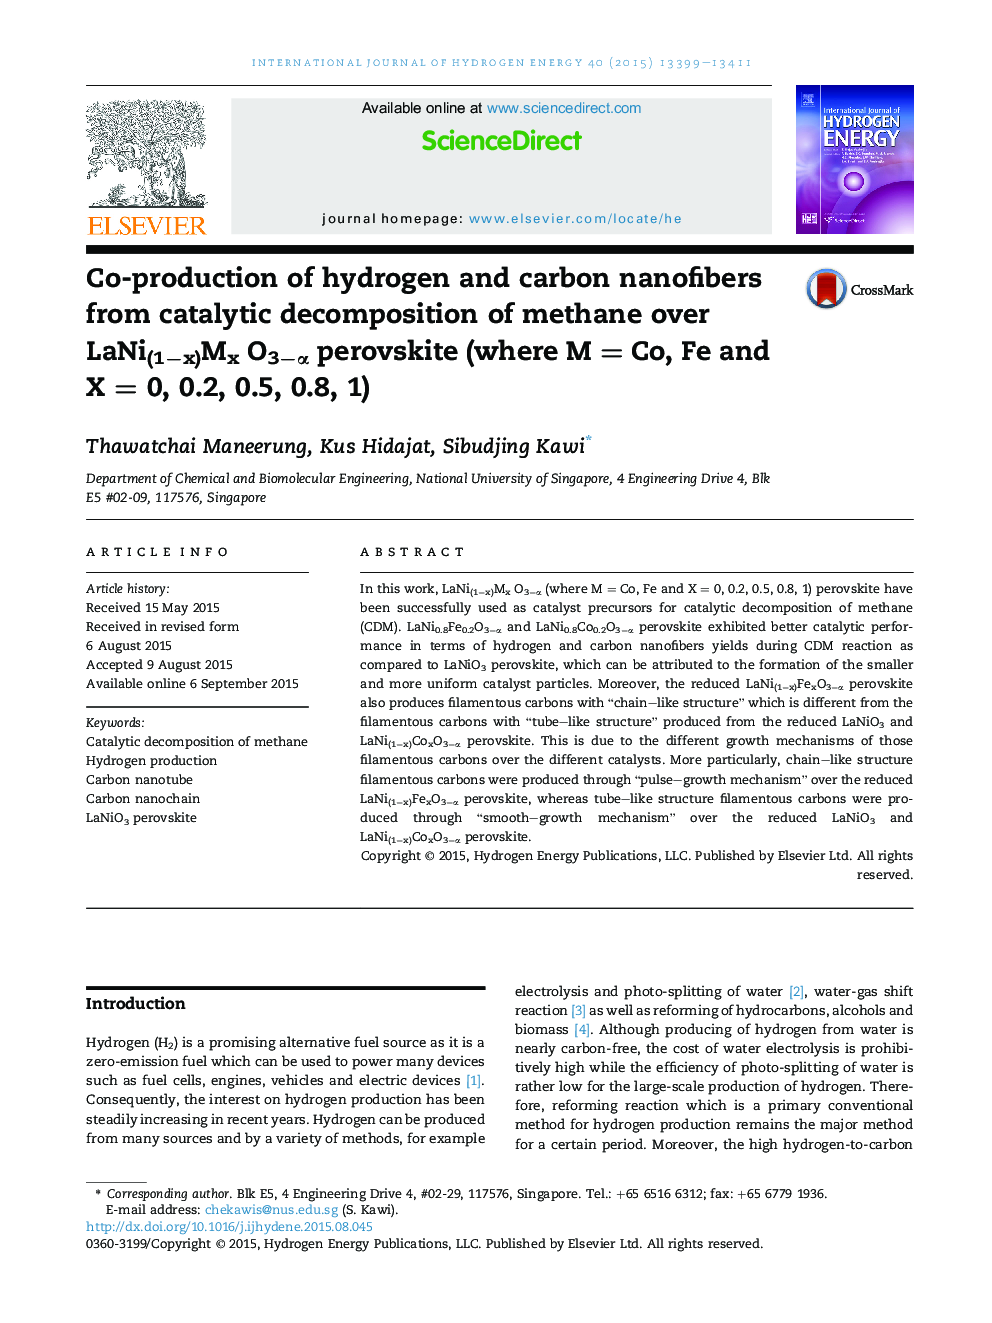 Co-production of hydrogen and carbon nanofibers from catalytic decomposition of methane over LaNi(1−x)Mx O3−α perovskite (where M = Co, Fe and X = 0, 0.2, 0.5, 0.8, 1)